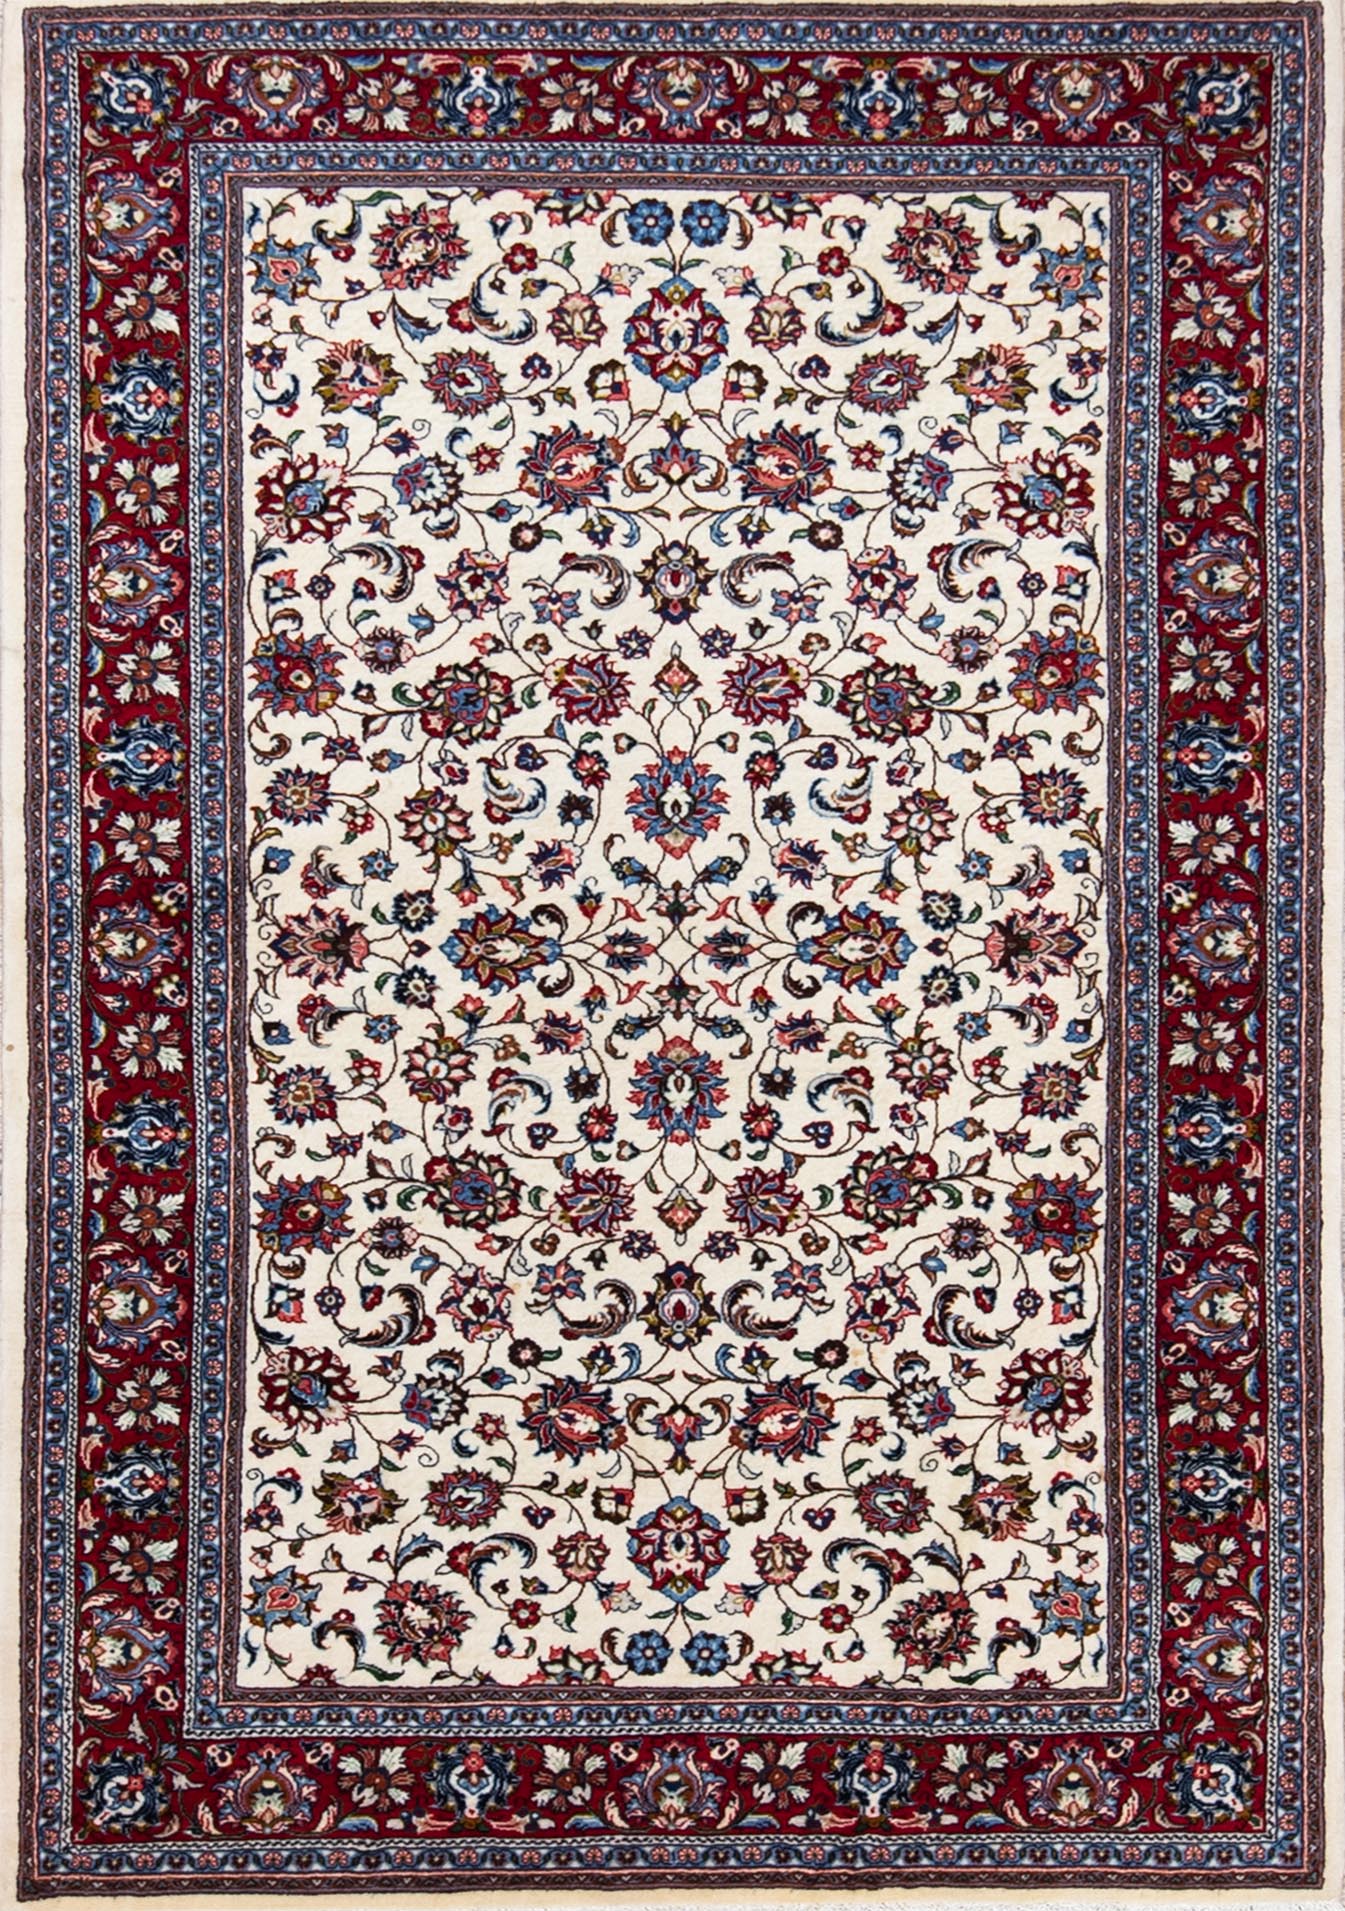 Handmade Persian Sarouk wool rug, floral design with white color in the primary field and red in the borders. Rug size 4.5x7.